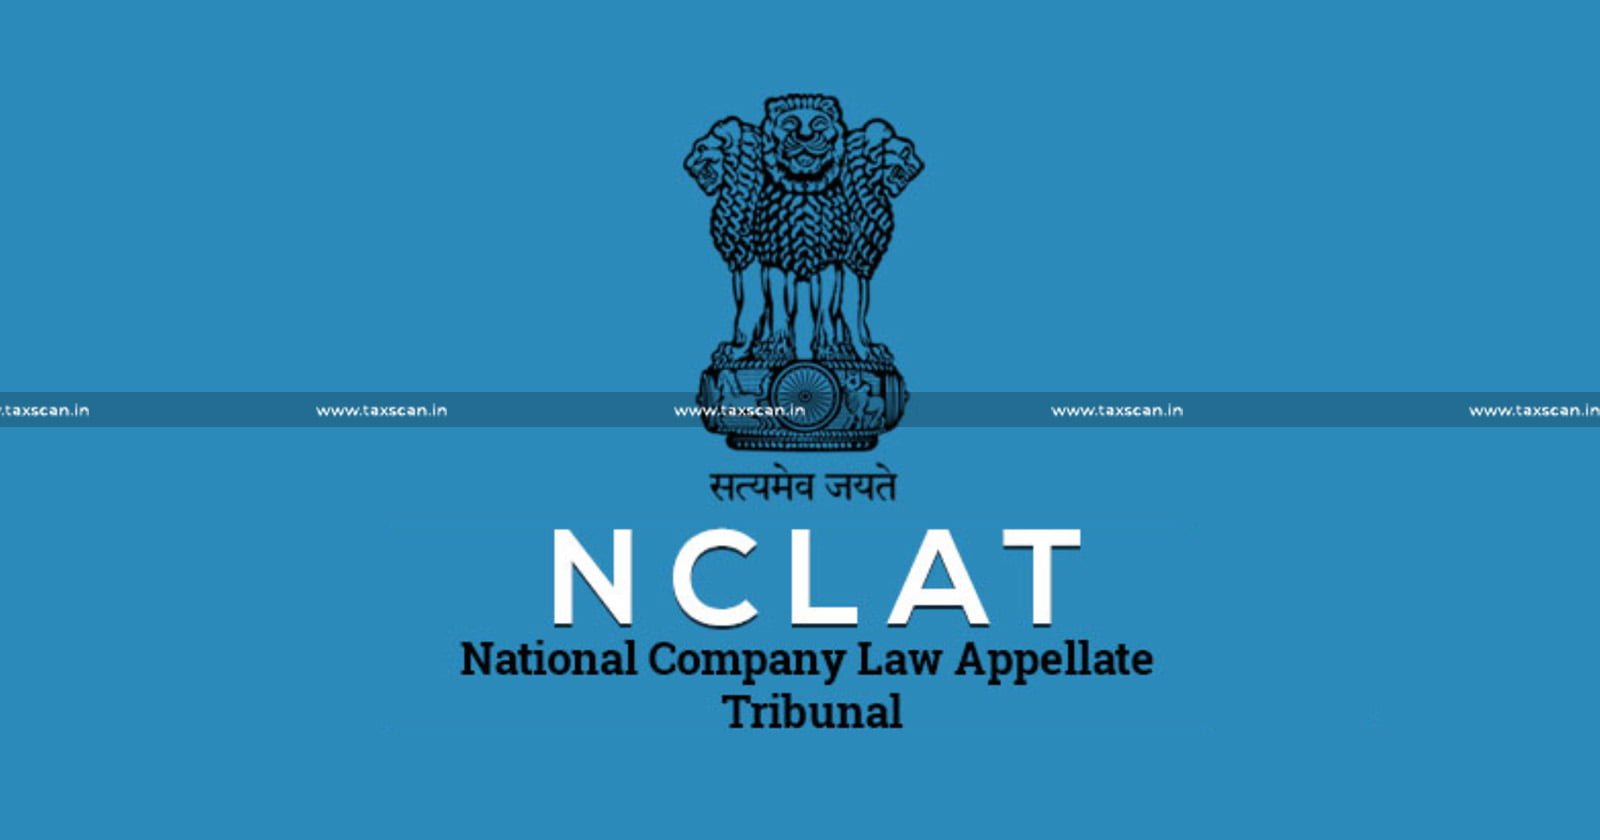 debt - When debt and default is proved - Adjudicating Authority - Incomplete - NCLAT - taxscan